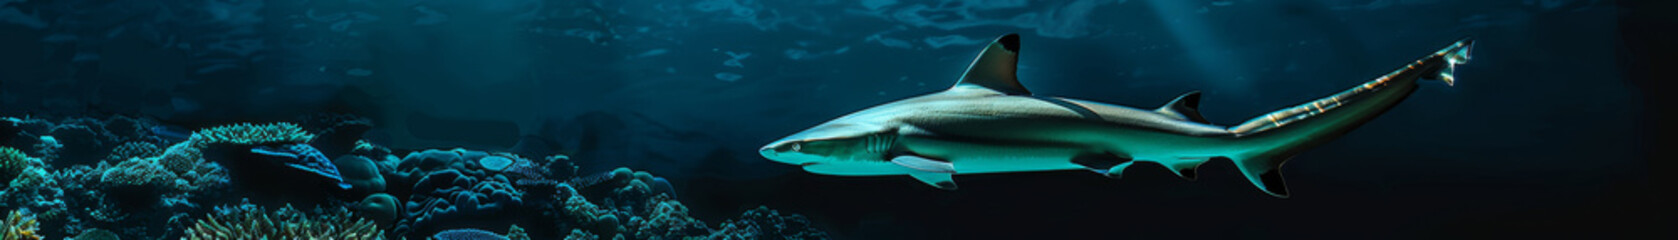 Lone Reef Shark Near a Coral Bed with Sunlit Background